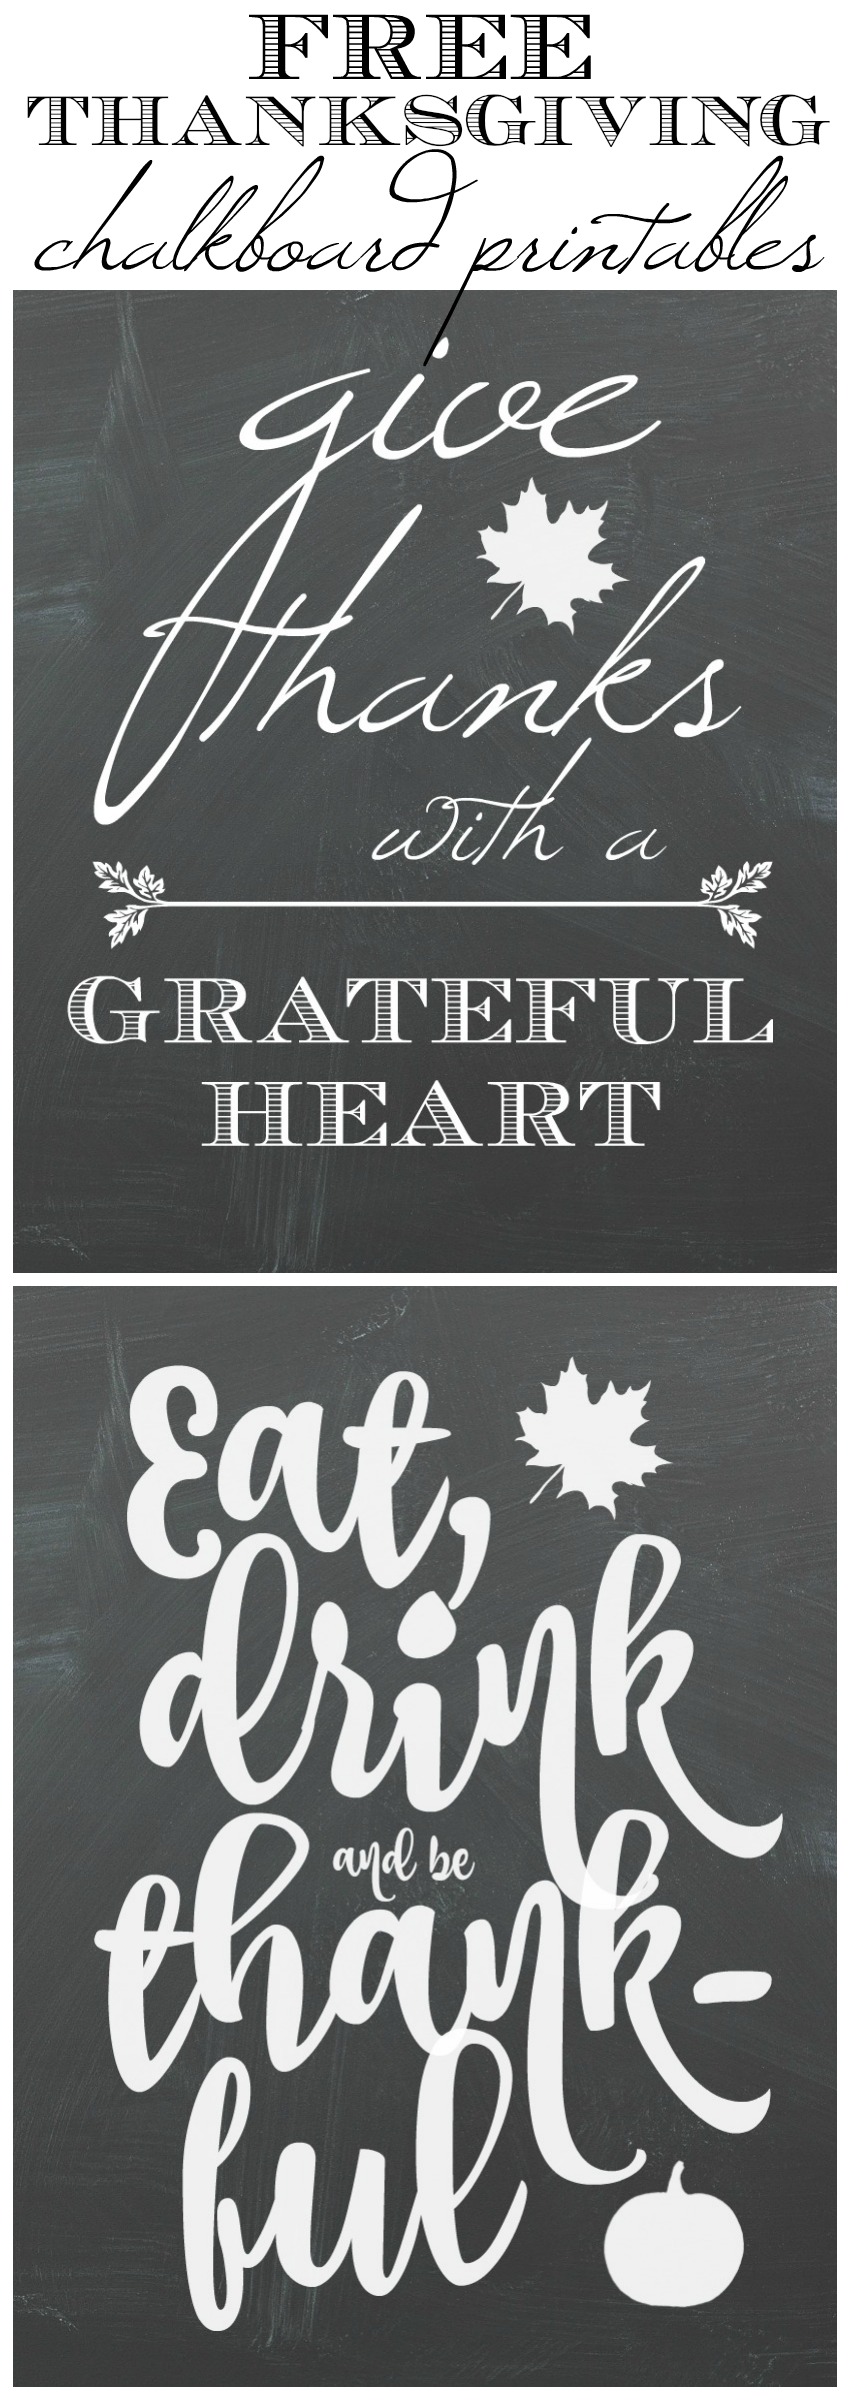 free-thanksgiving-chalkboard-printables-at-the-happy-housie